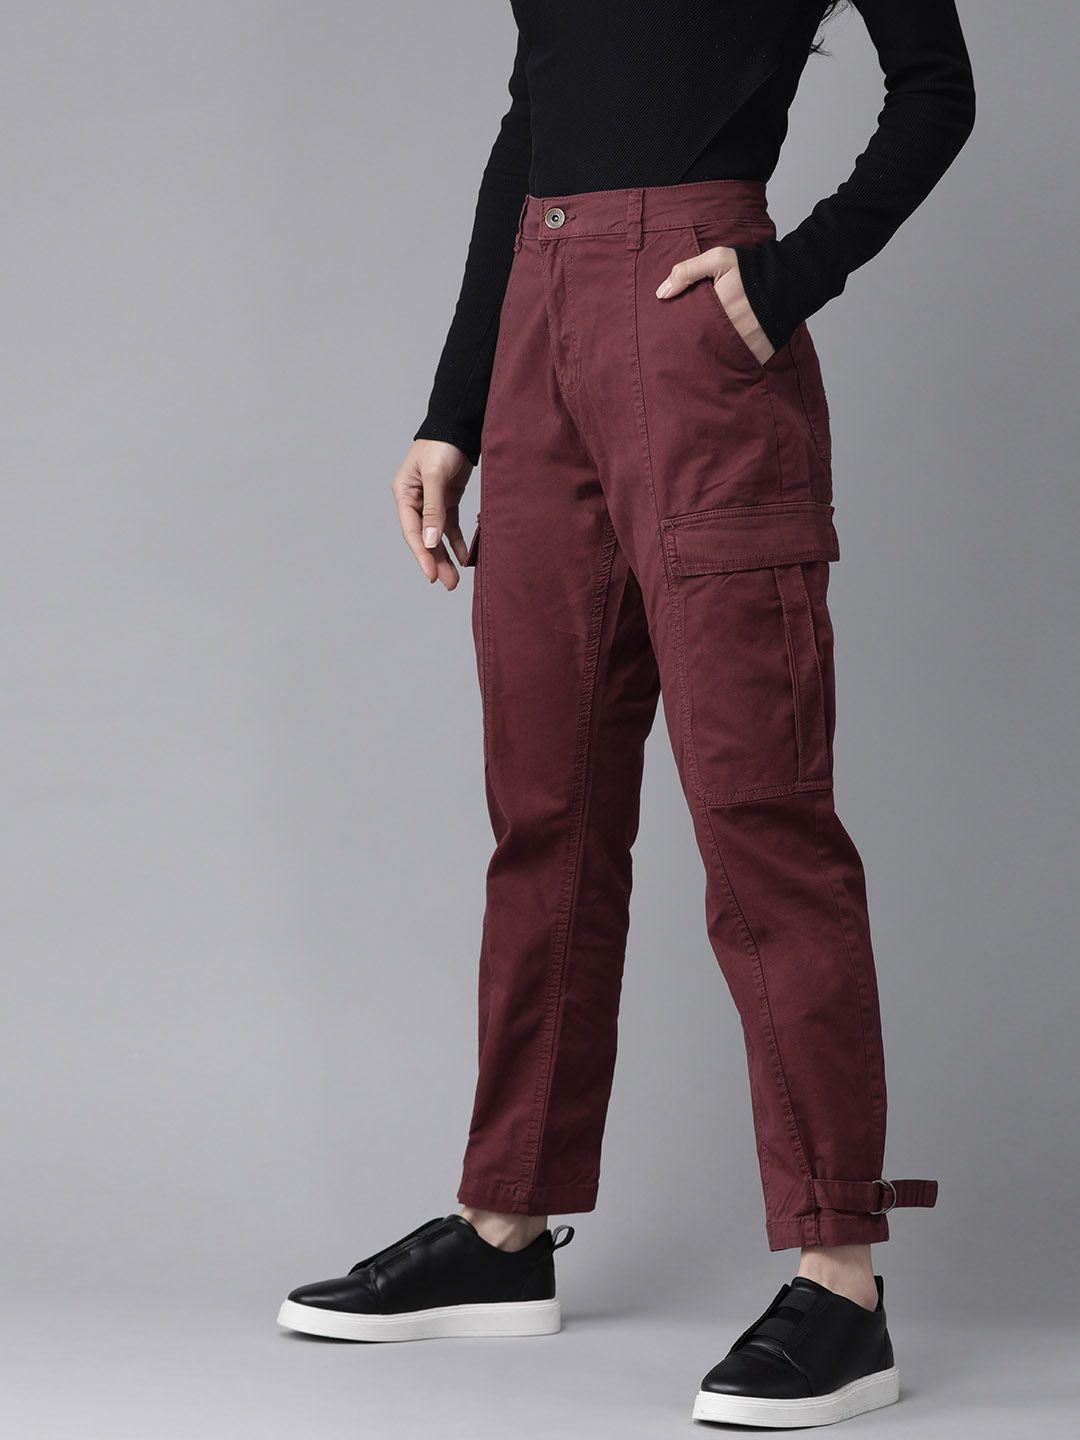 the roadster lifestyle co women burgundy relaxed fit solid cargos